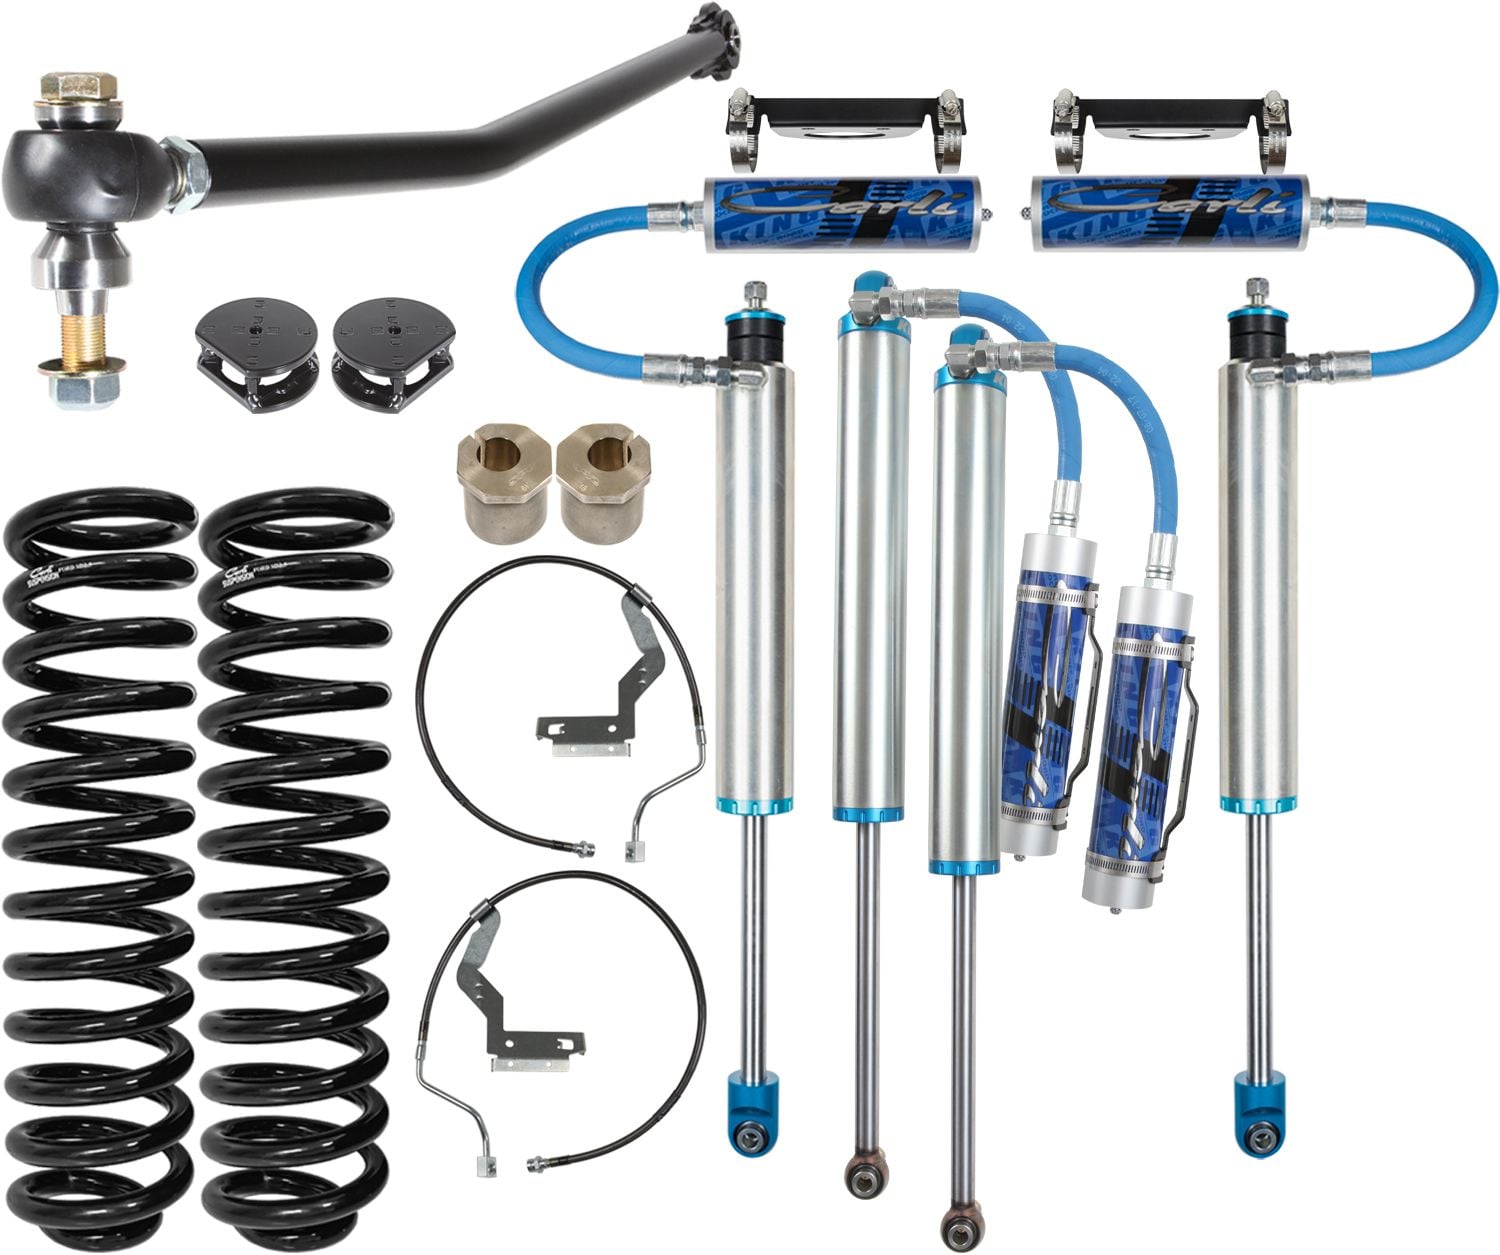 Carli lift kits - Page 2 - Ford Truck Enthusiasts Forums